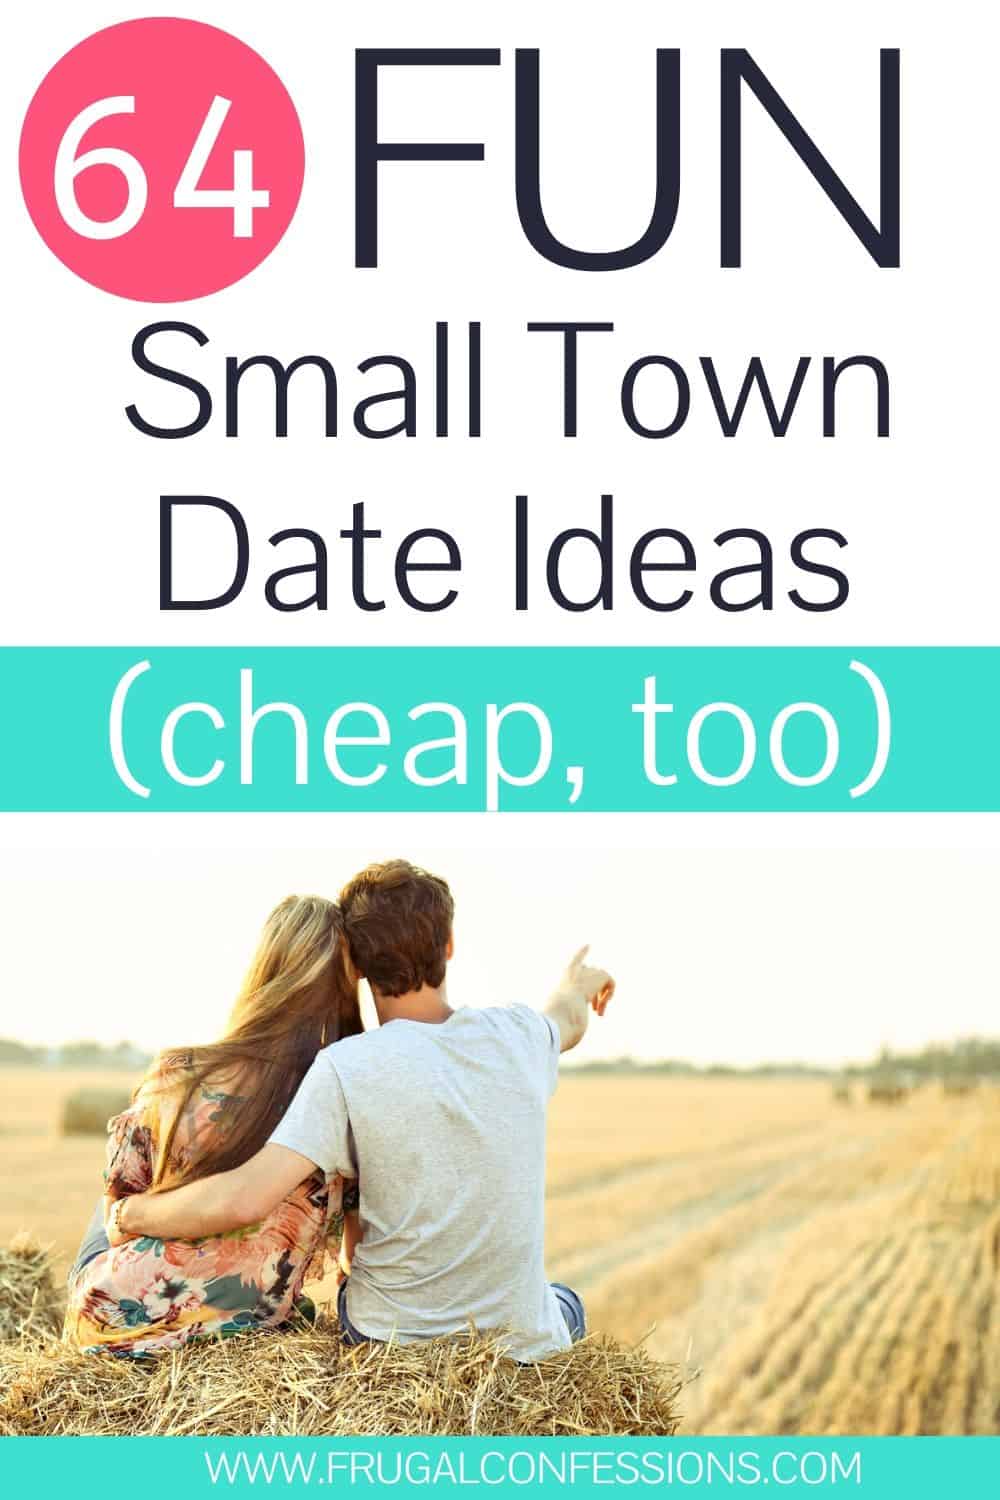 couple in a small town on a bale of hay, text overlay "64 fun small town date ideas (cheap, too)"